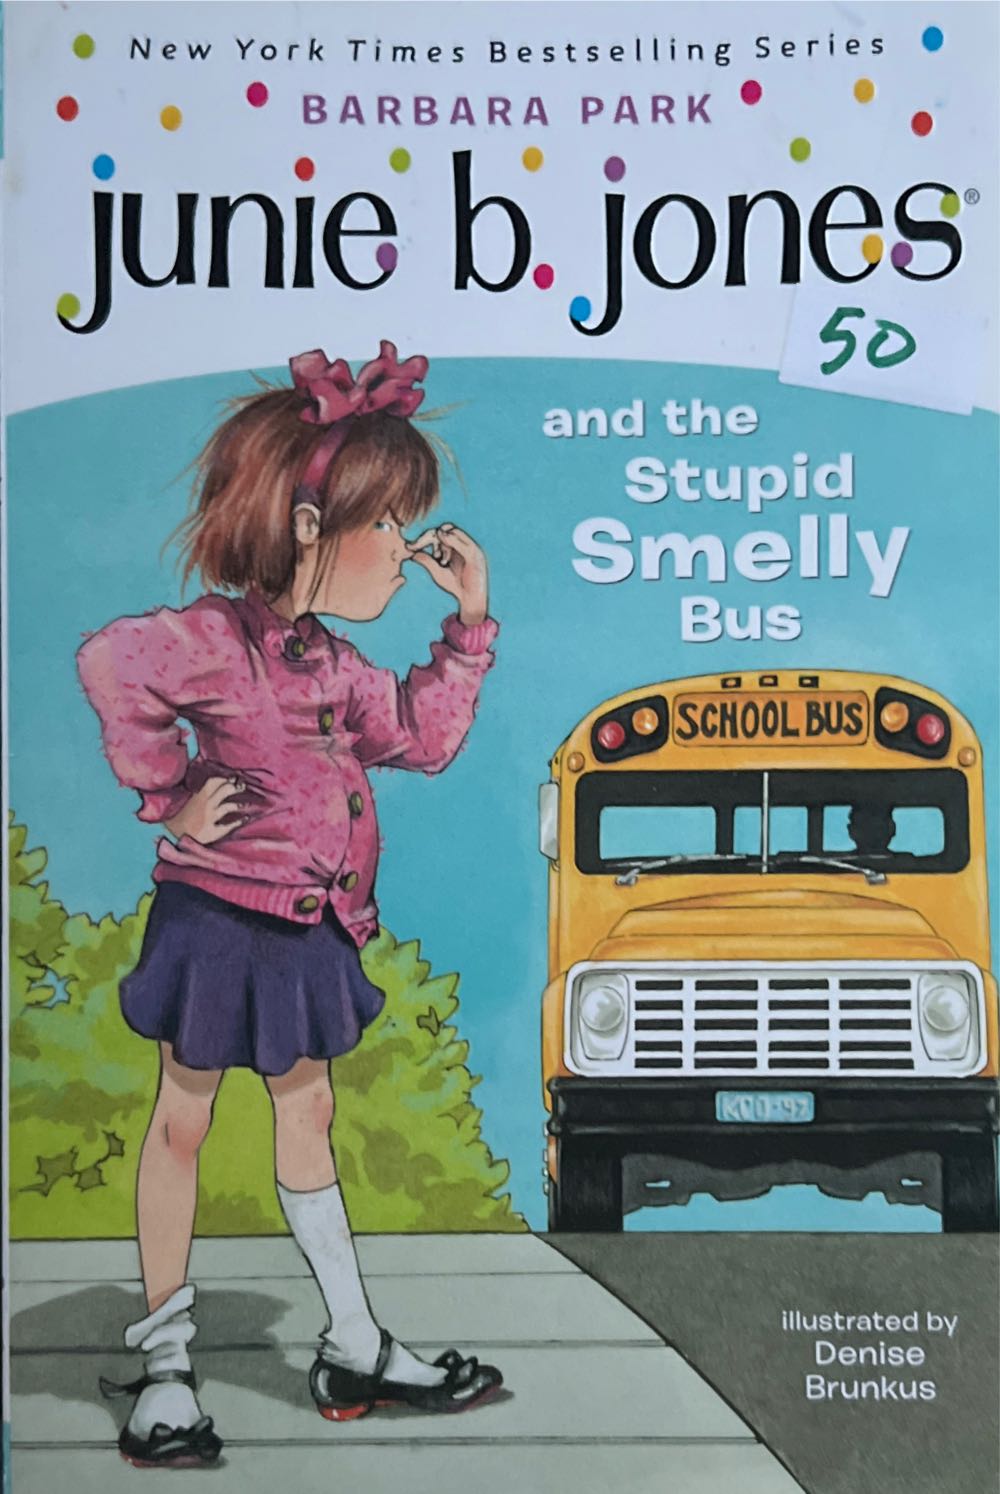 Junie B. Jones #1: And The Stupid Smelly - Barbara Park (Random House Inc. - Paperback) book collectible [Barcode 9780679826422] - Main Image 3